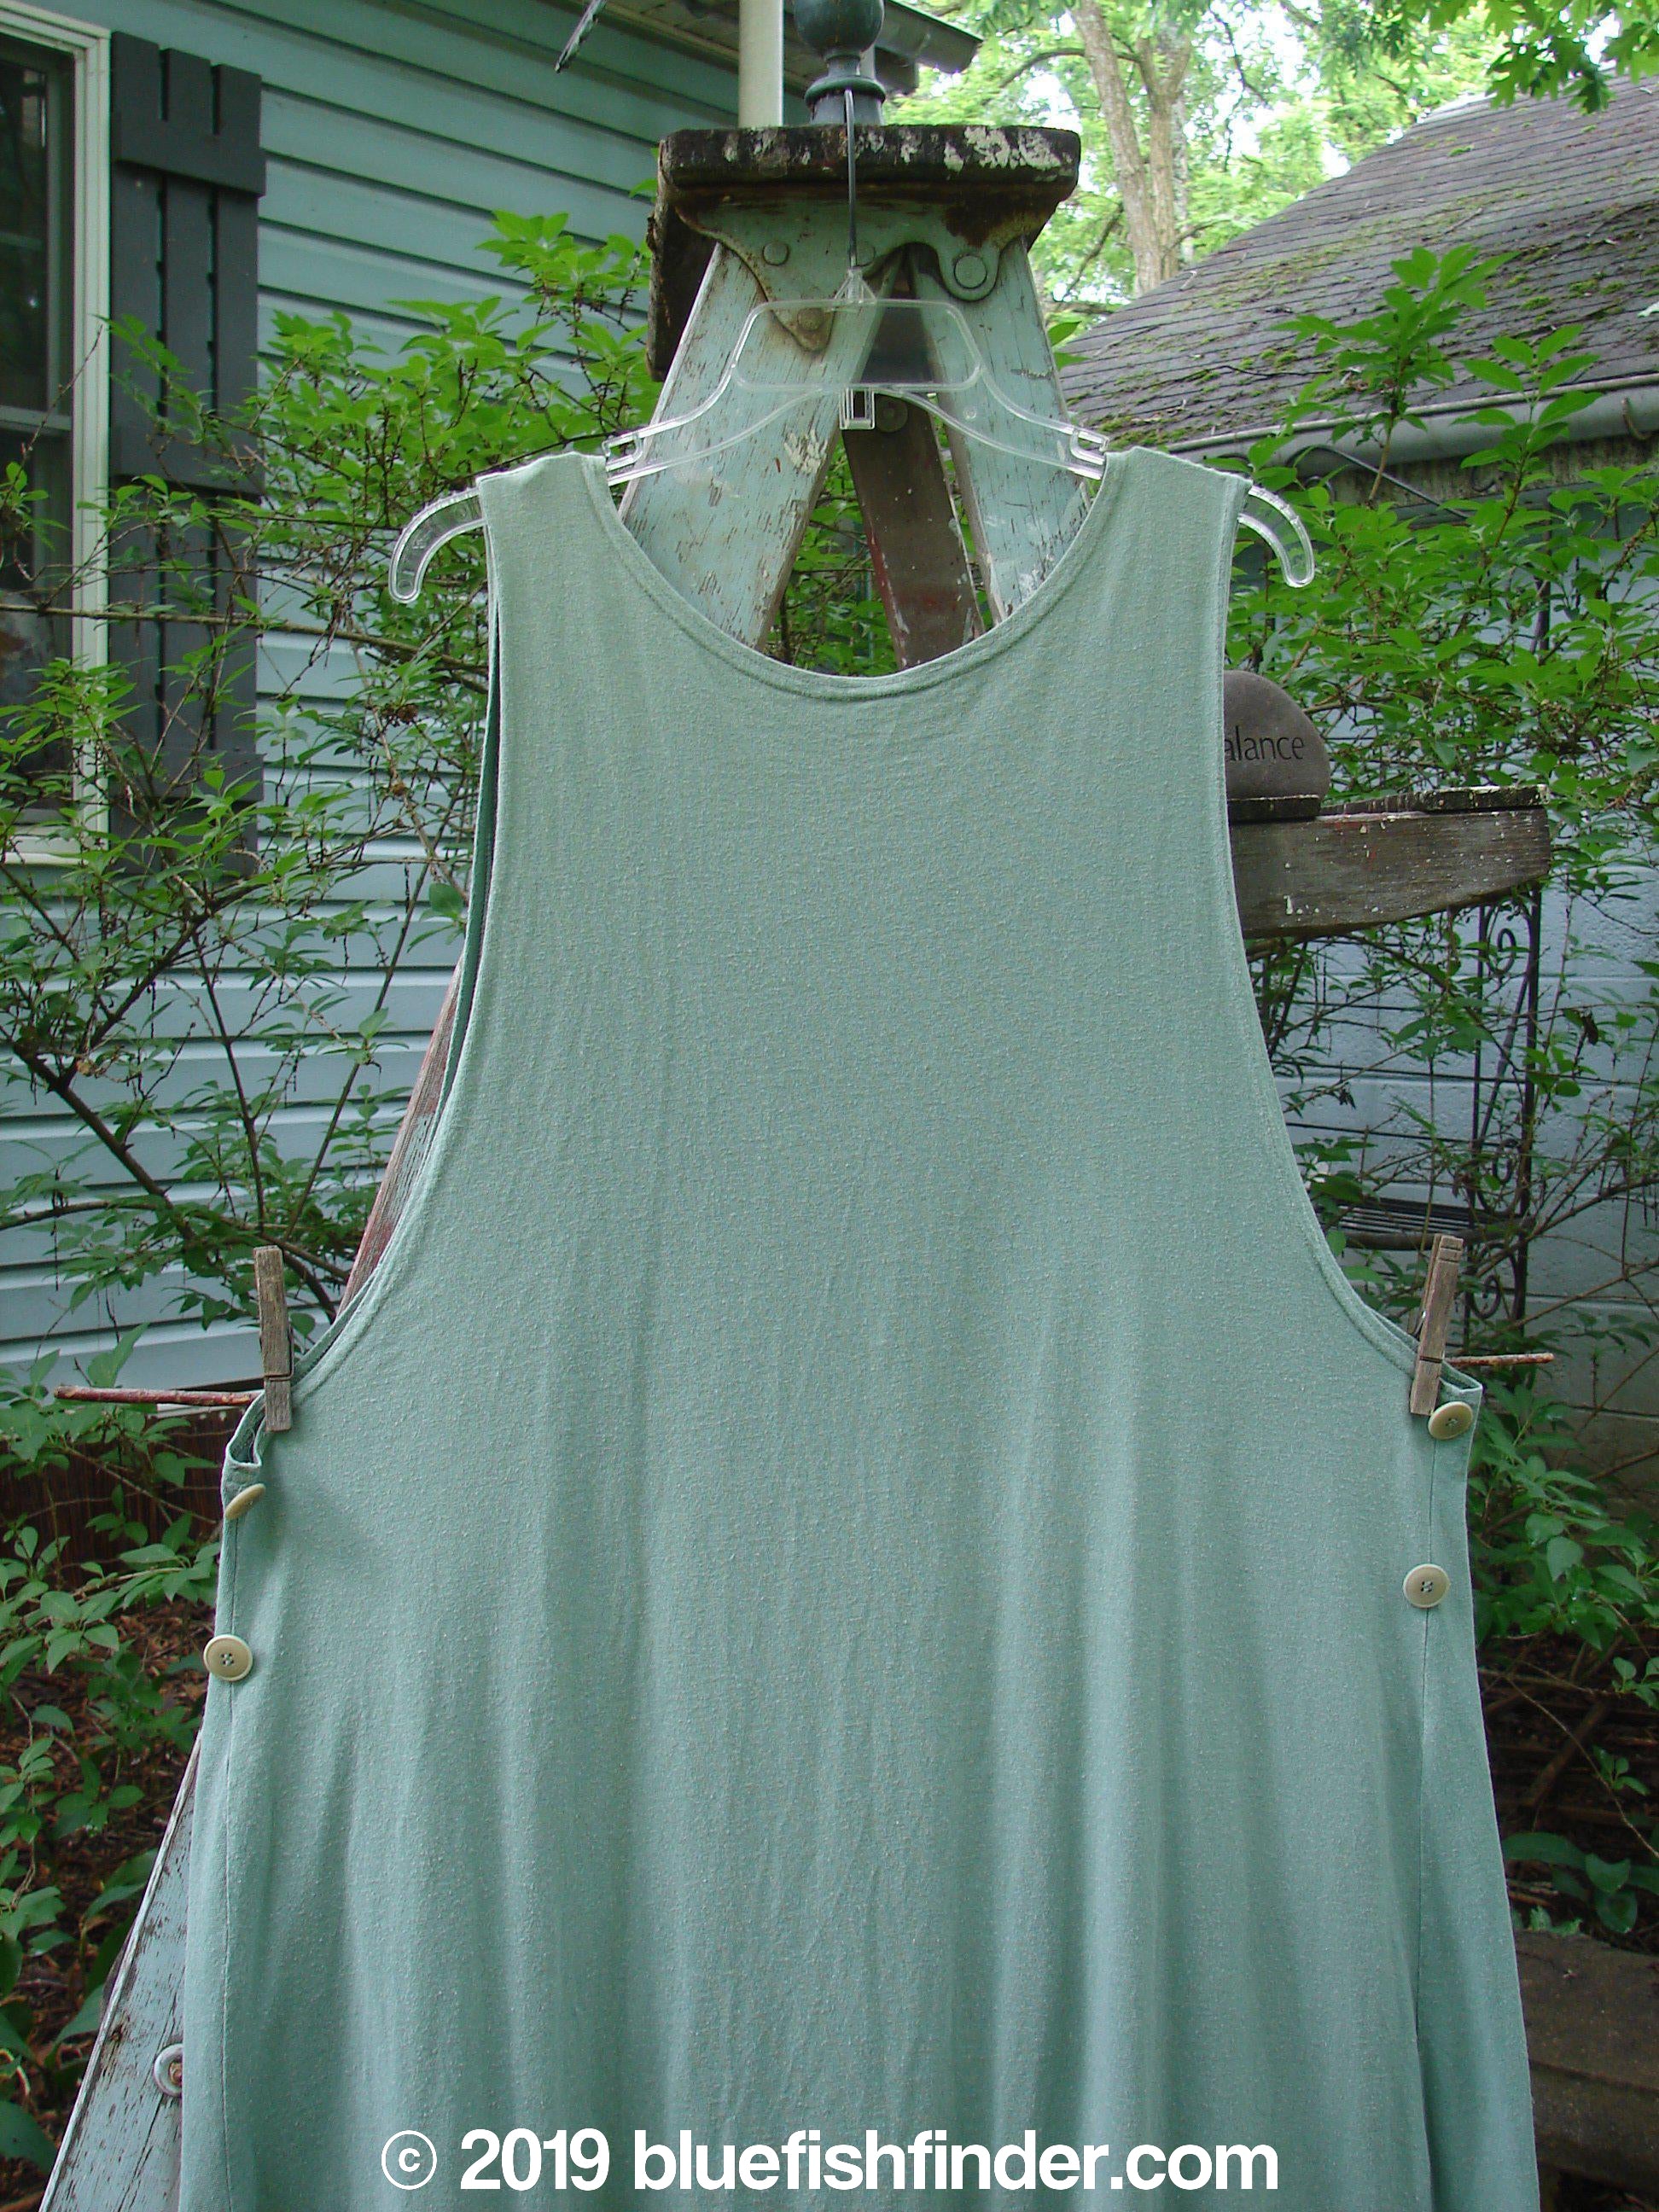 1994 Side Button Jumper Butterfly Garden River Size 1: A green shirt on a clothesline, part of the Spring Collection.